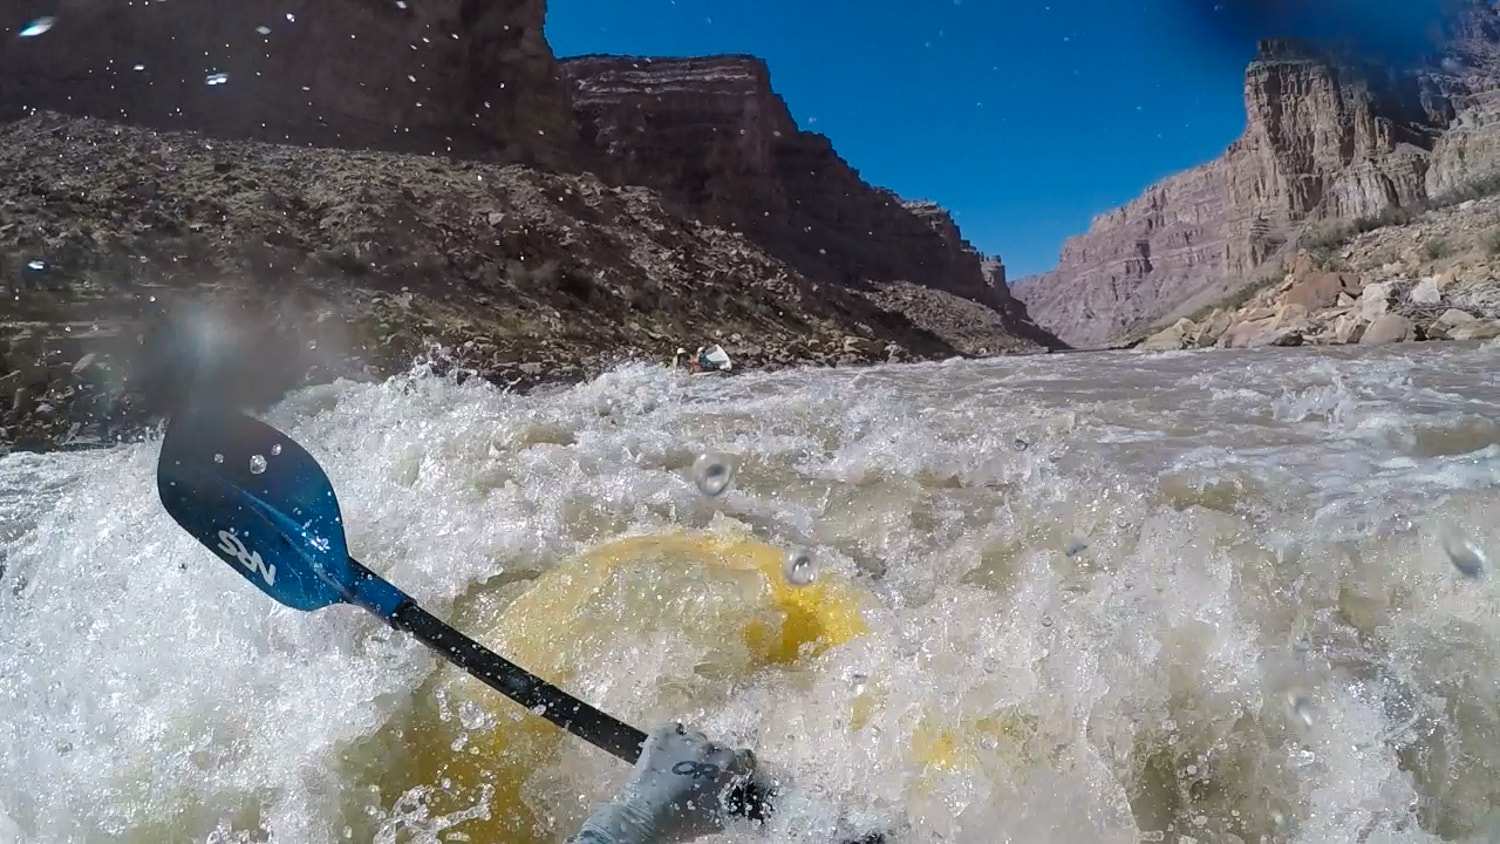 A Journey Through Fear on the Colorado River in an Inflatable Kayak